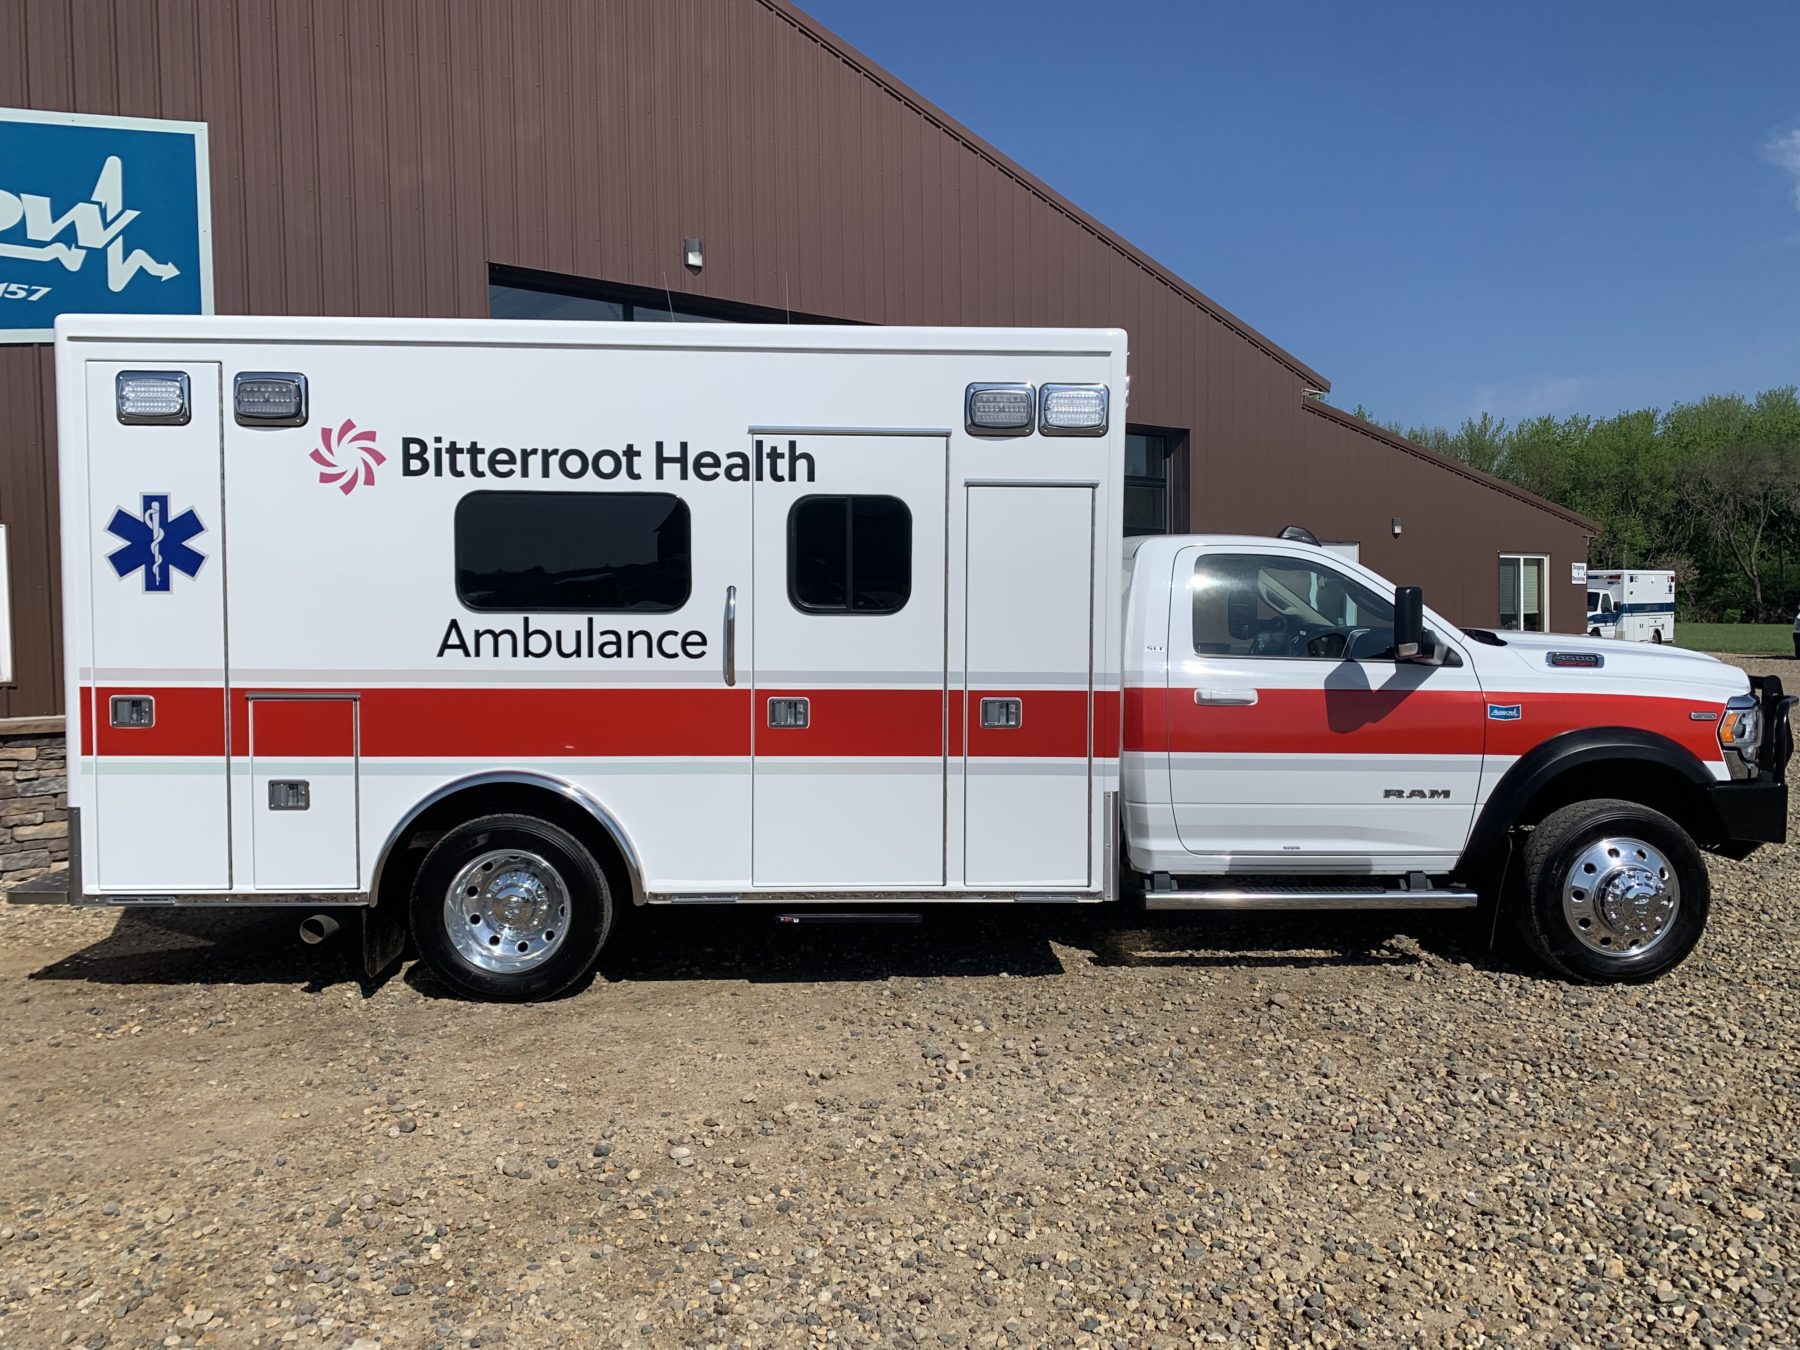 2020 Ram 4500 4x4 Heavy Duty Ambulance For Sale – Picture 4